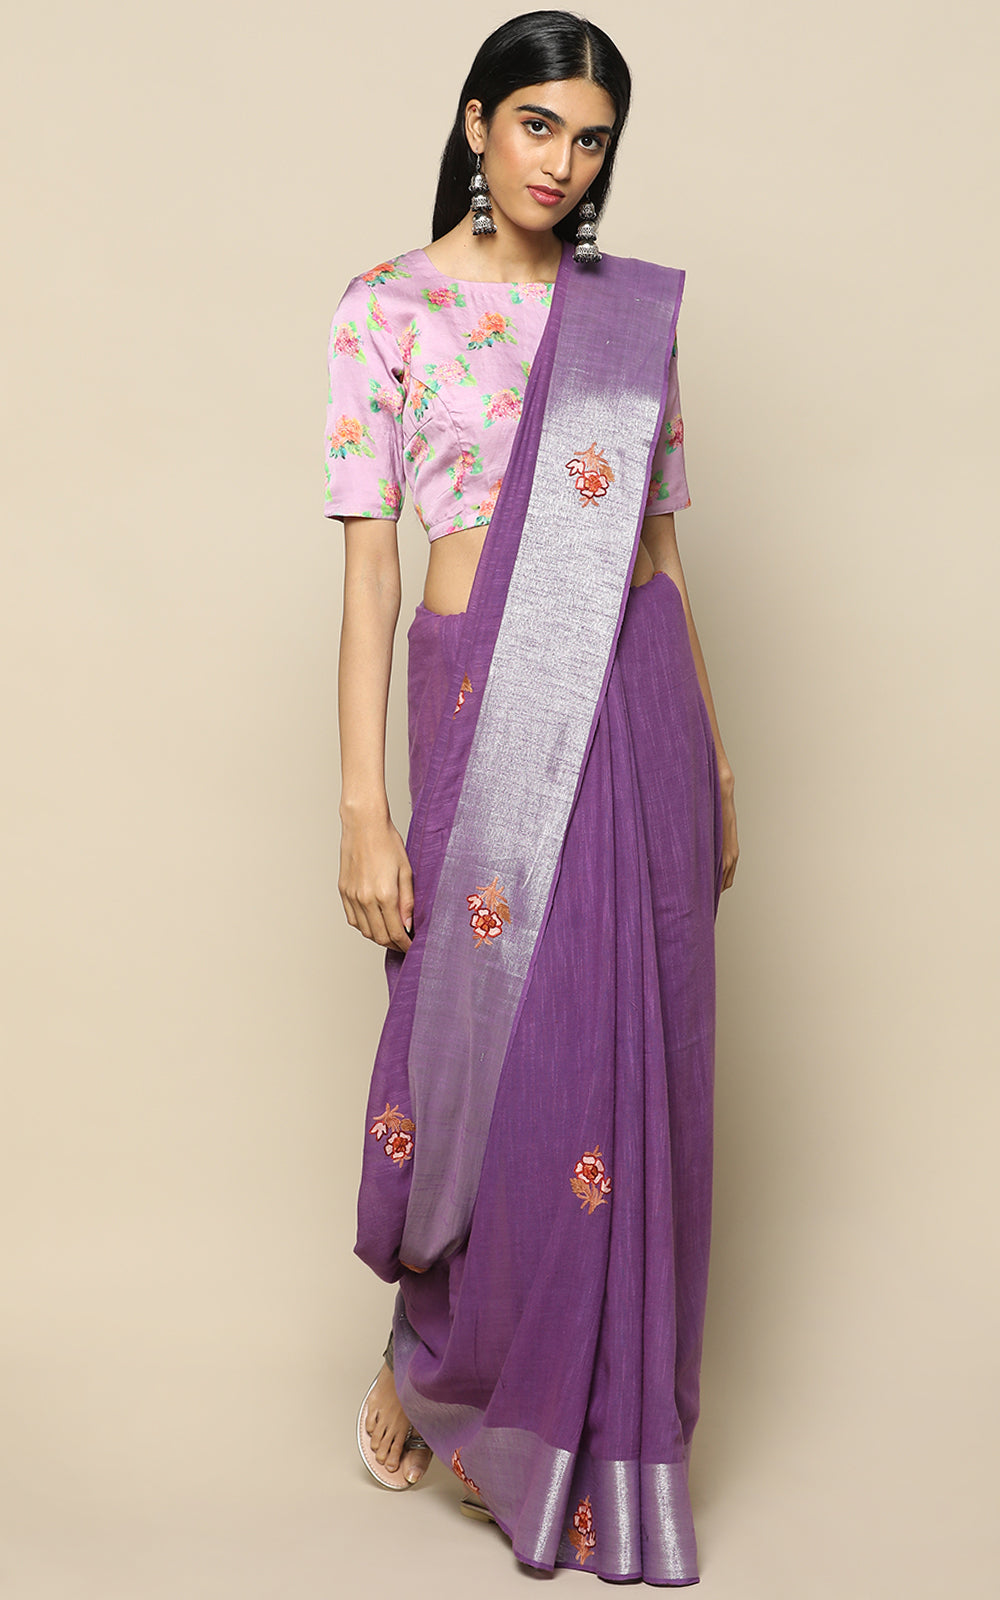 VIOLET SAREE WITH KASHMIRI HAND EMBROIDERY